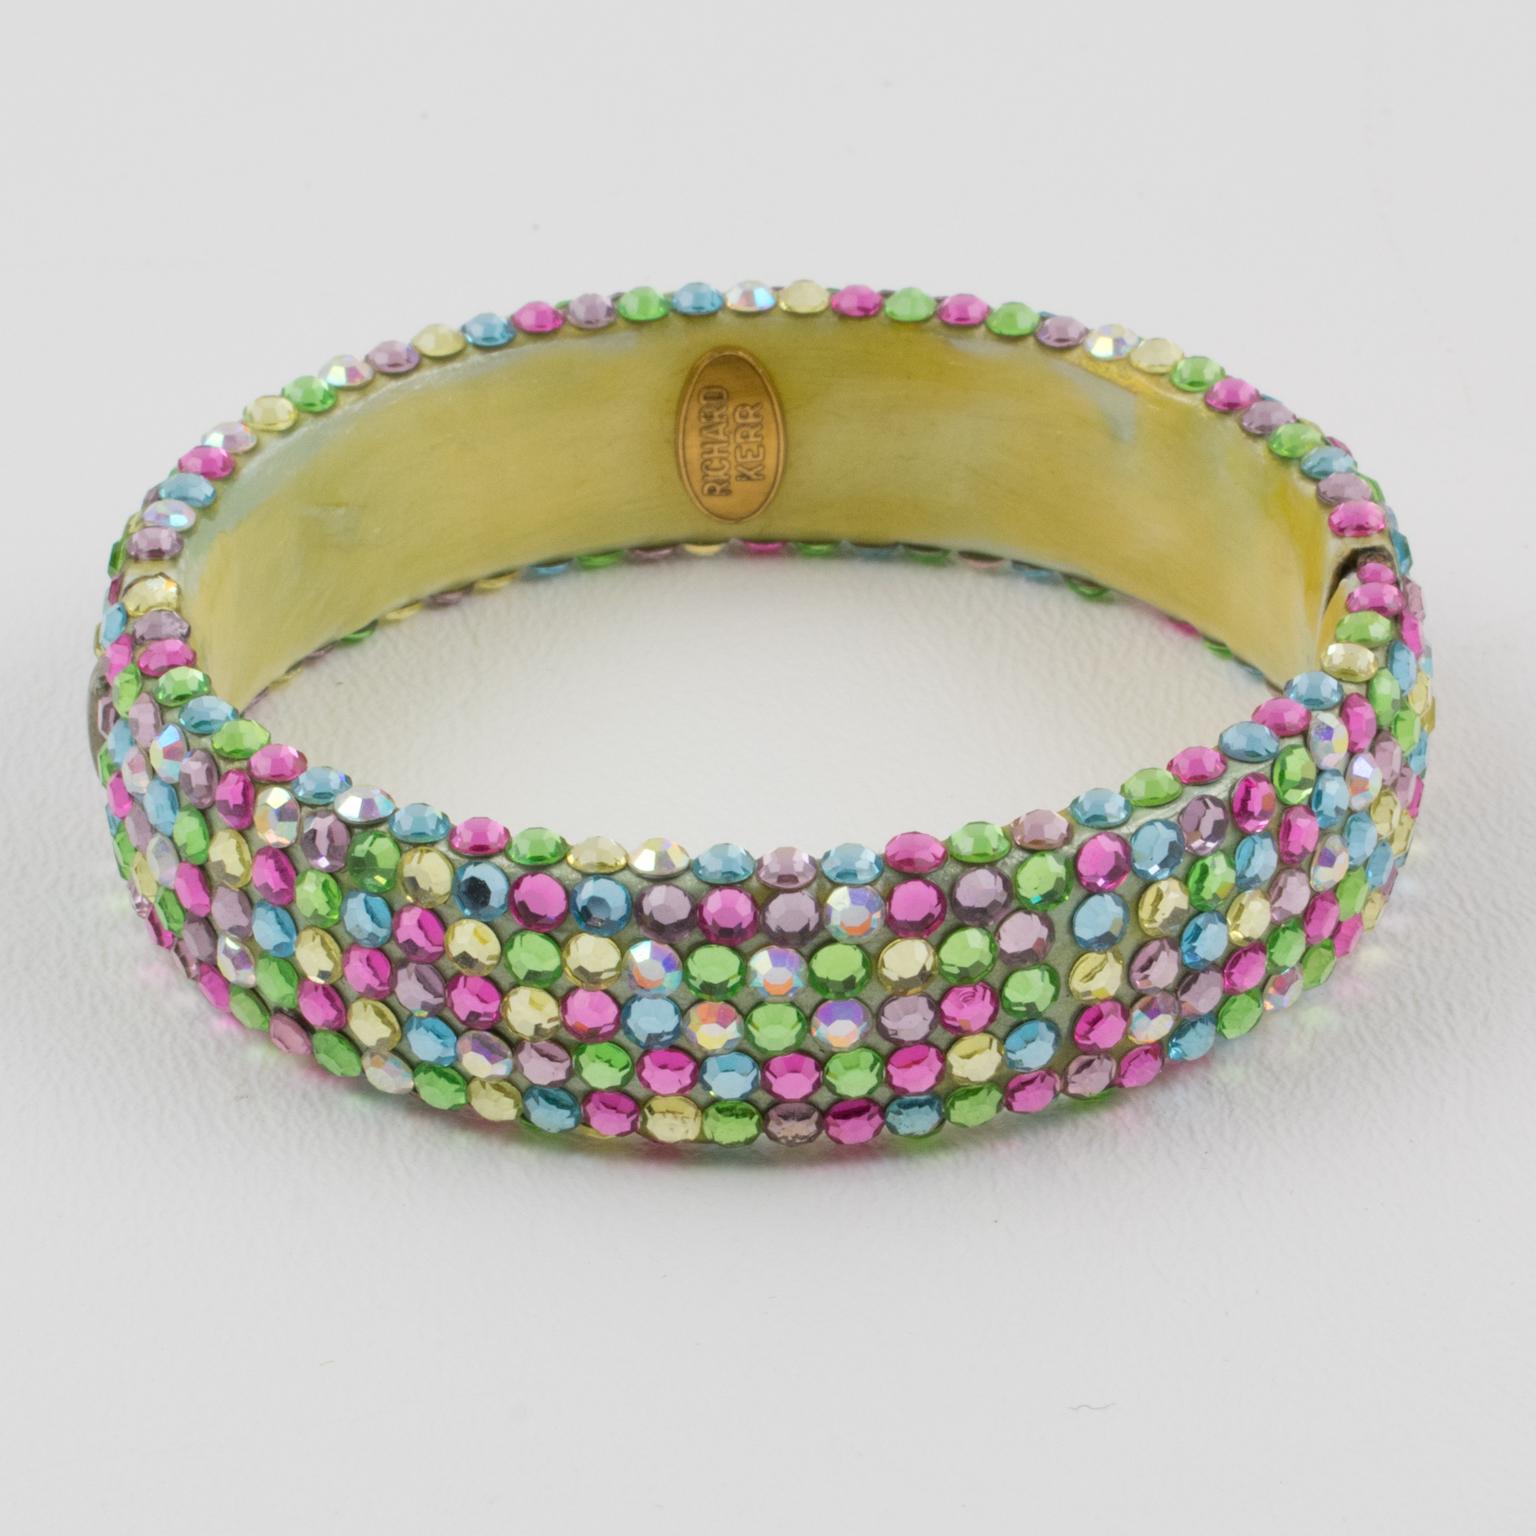 Fabulous statement clamper bracelet designed by Richard Kerr in the 1980s and made up of his signature pave rhinestones. The bracelet features a large band shape, all covered with multicolor crystal rhinestones. 
Assorted tutti frutti pastel colors